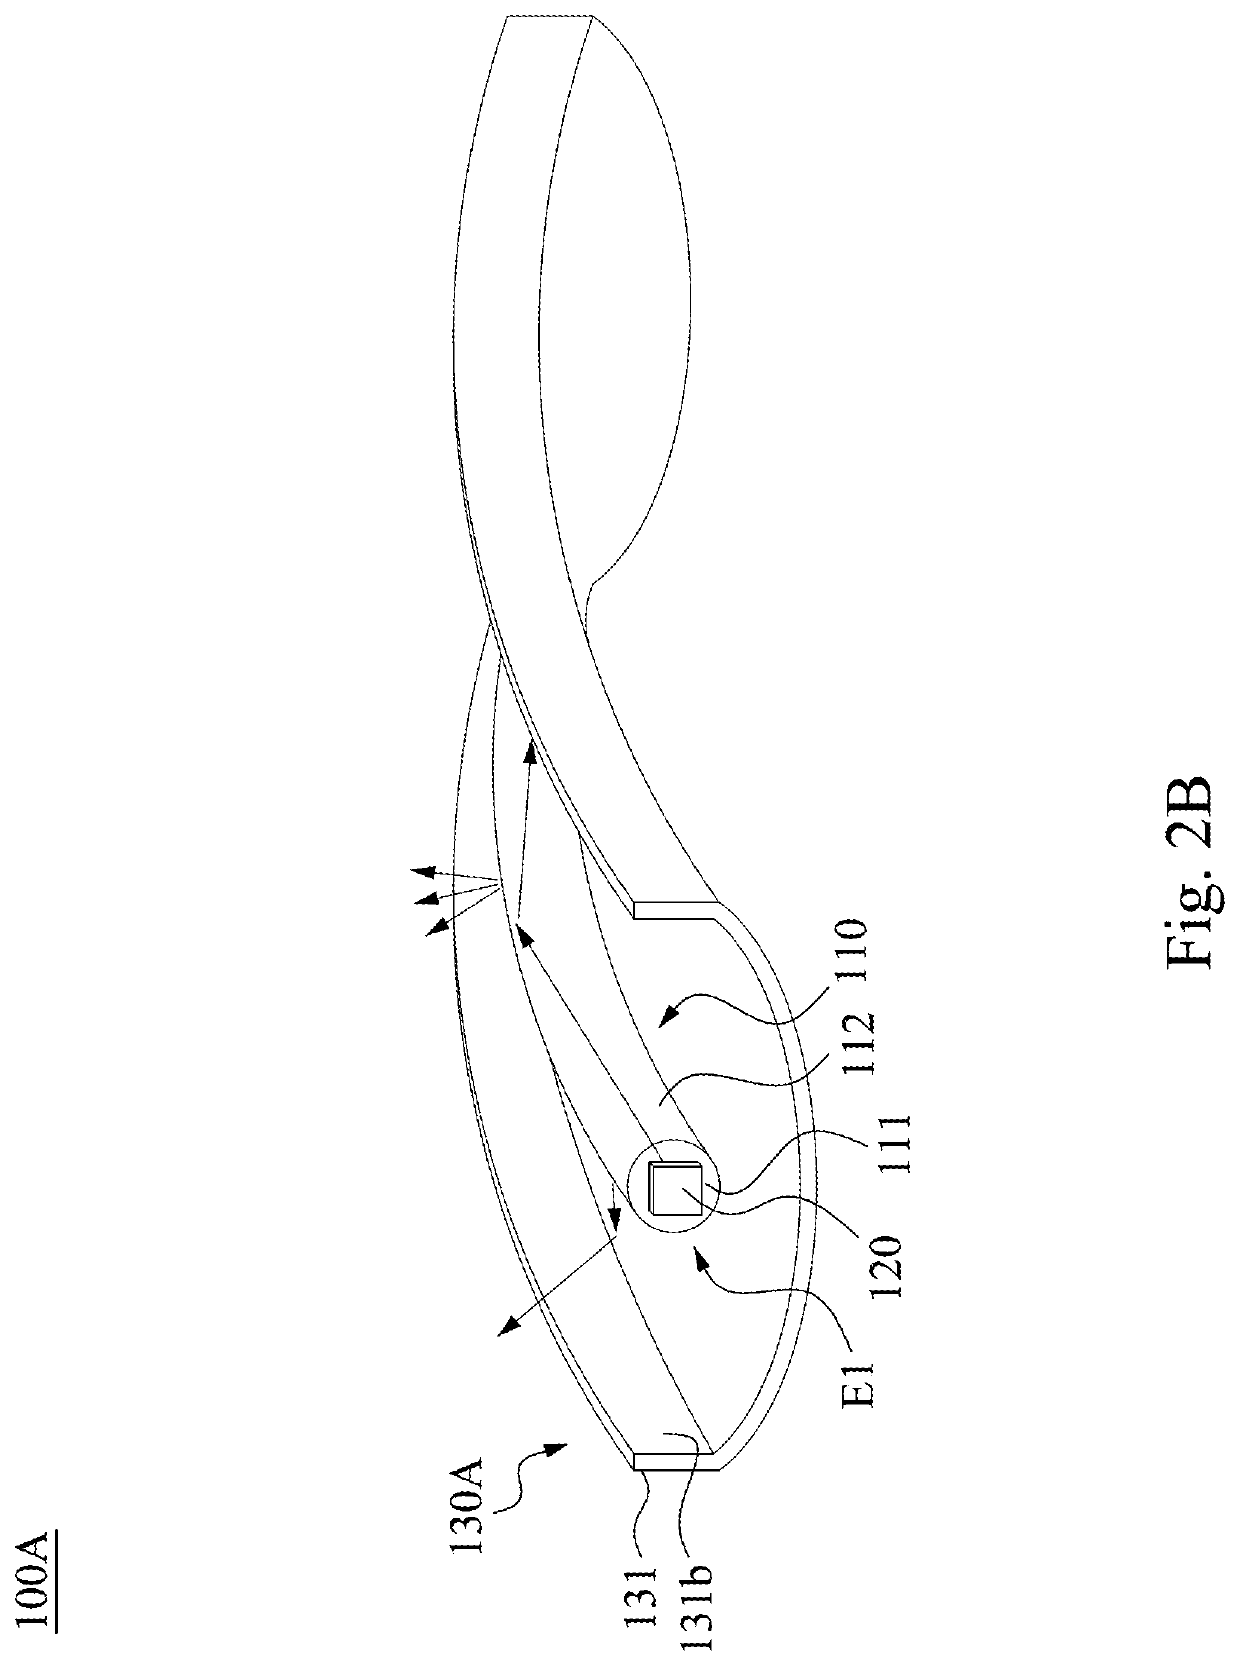 Traceable optical device